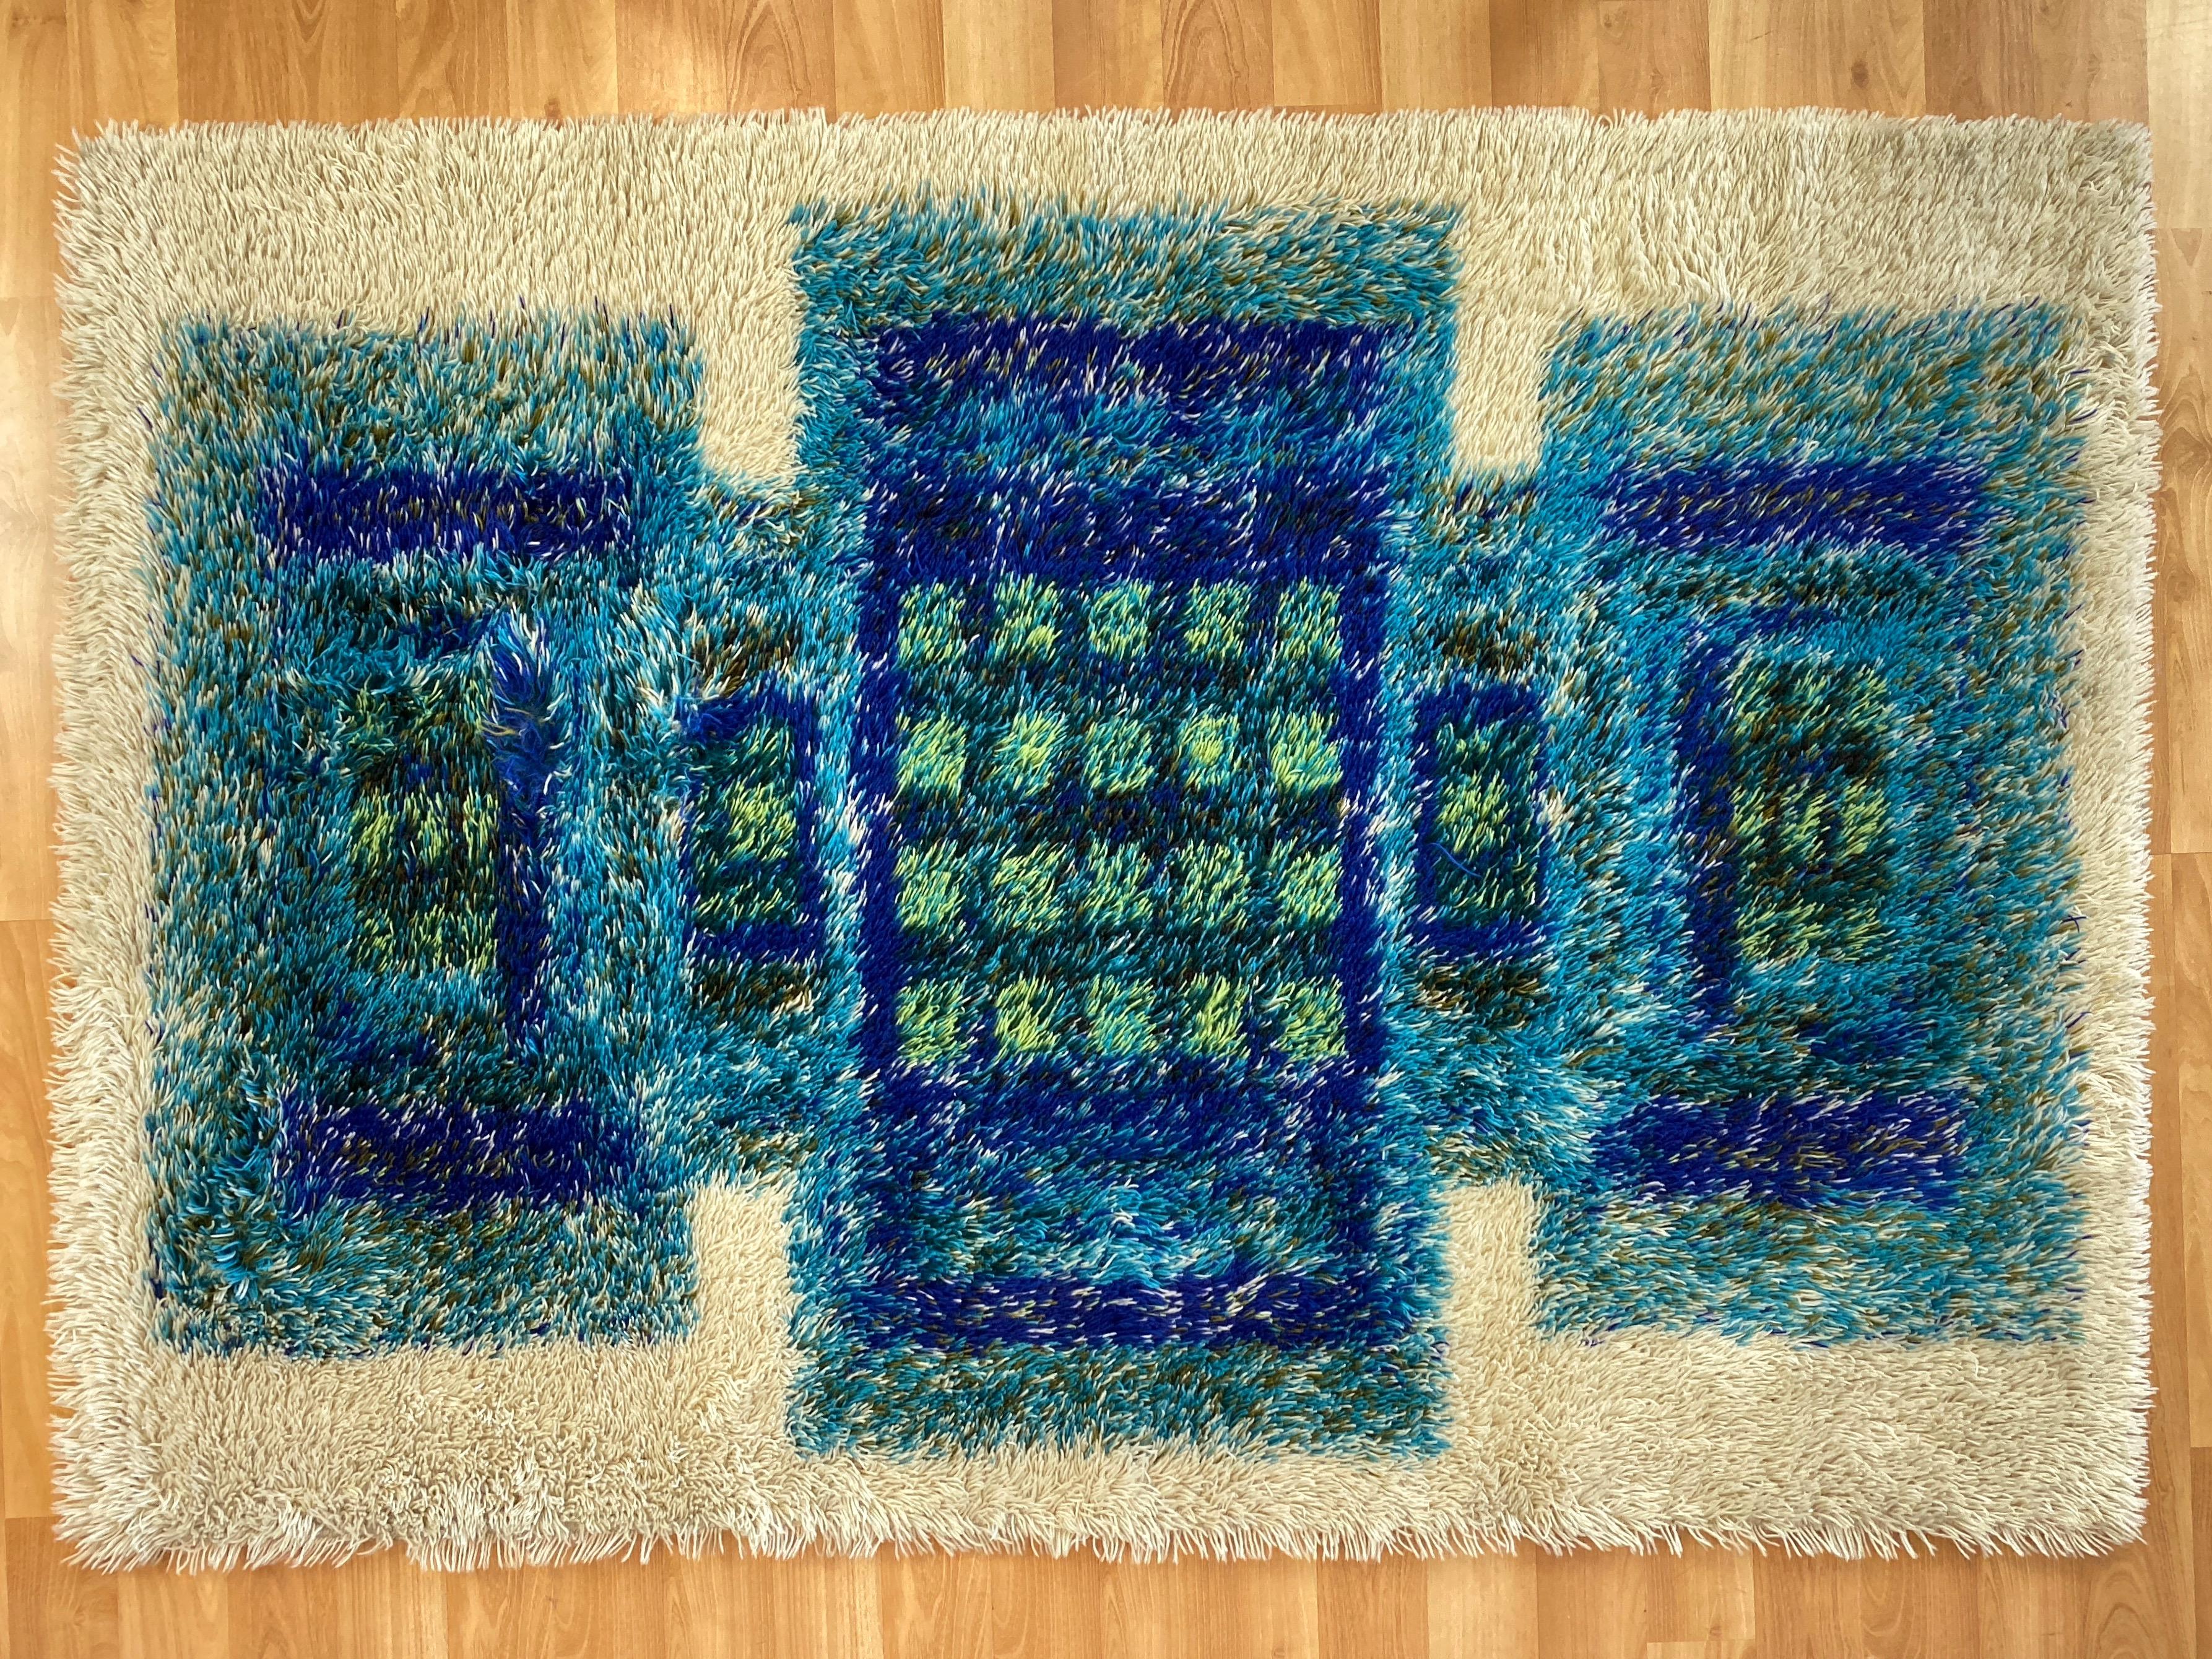 A 1960s Scandinavian Modern-style “Rya Sapphire” pattern 100% wool rug made in Austria exclusively for the “Connoisseur Rug Collection” by Sears.

Features a rich and vibrant jewel and semi-precious stone-colored design comprised of squares and